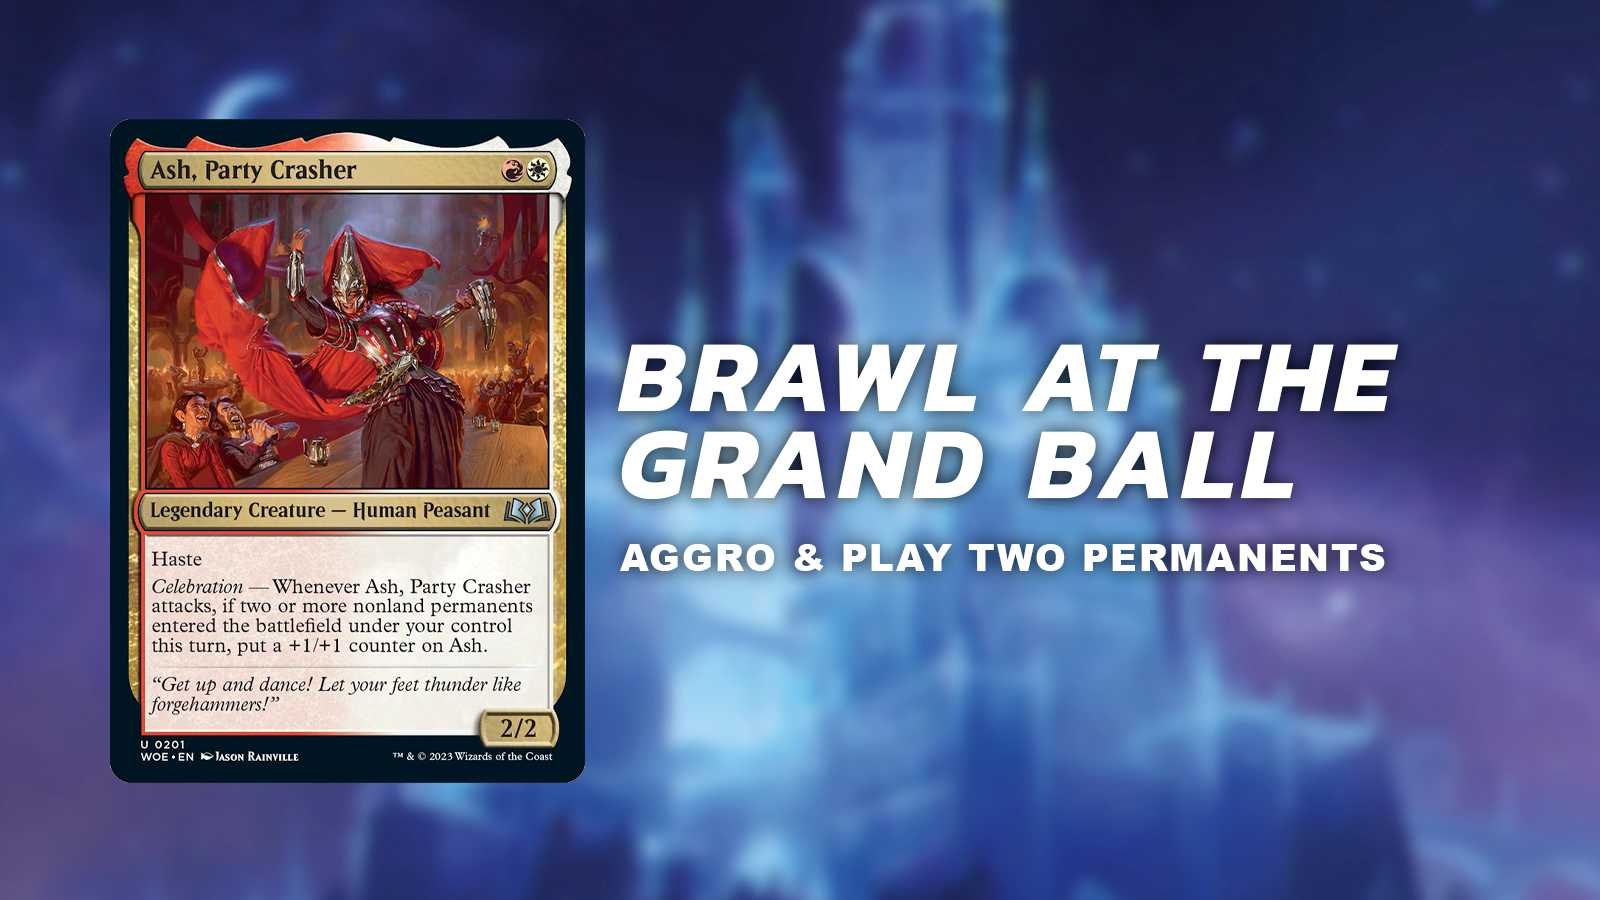 Brawl at the Grand Ball (aggro & play two permanents)